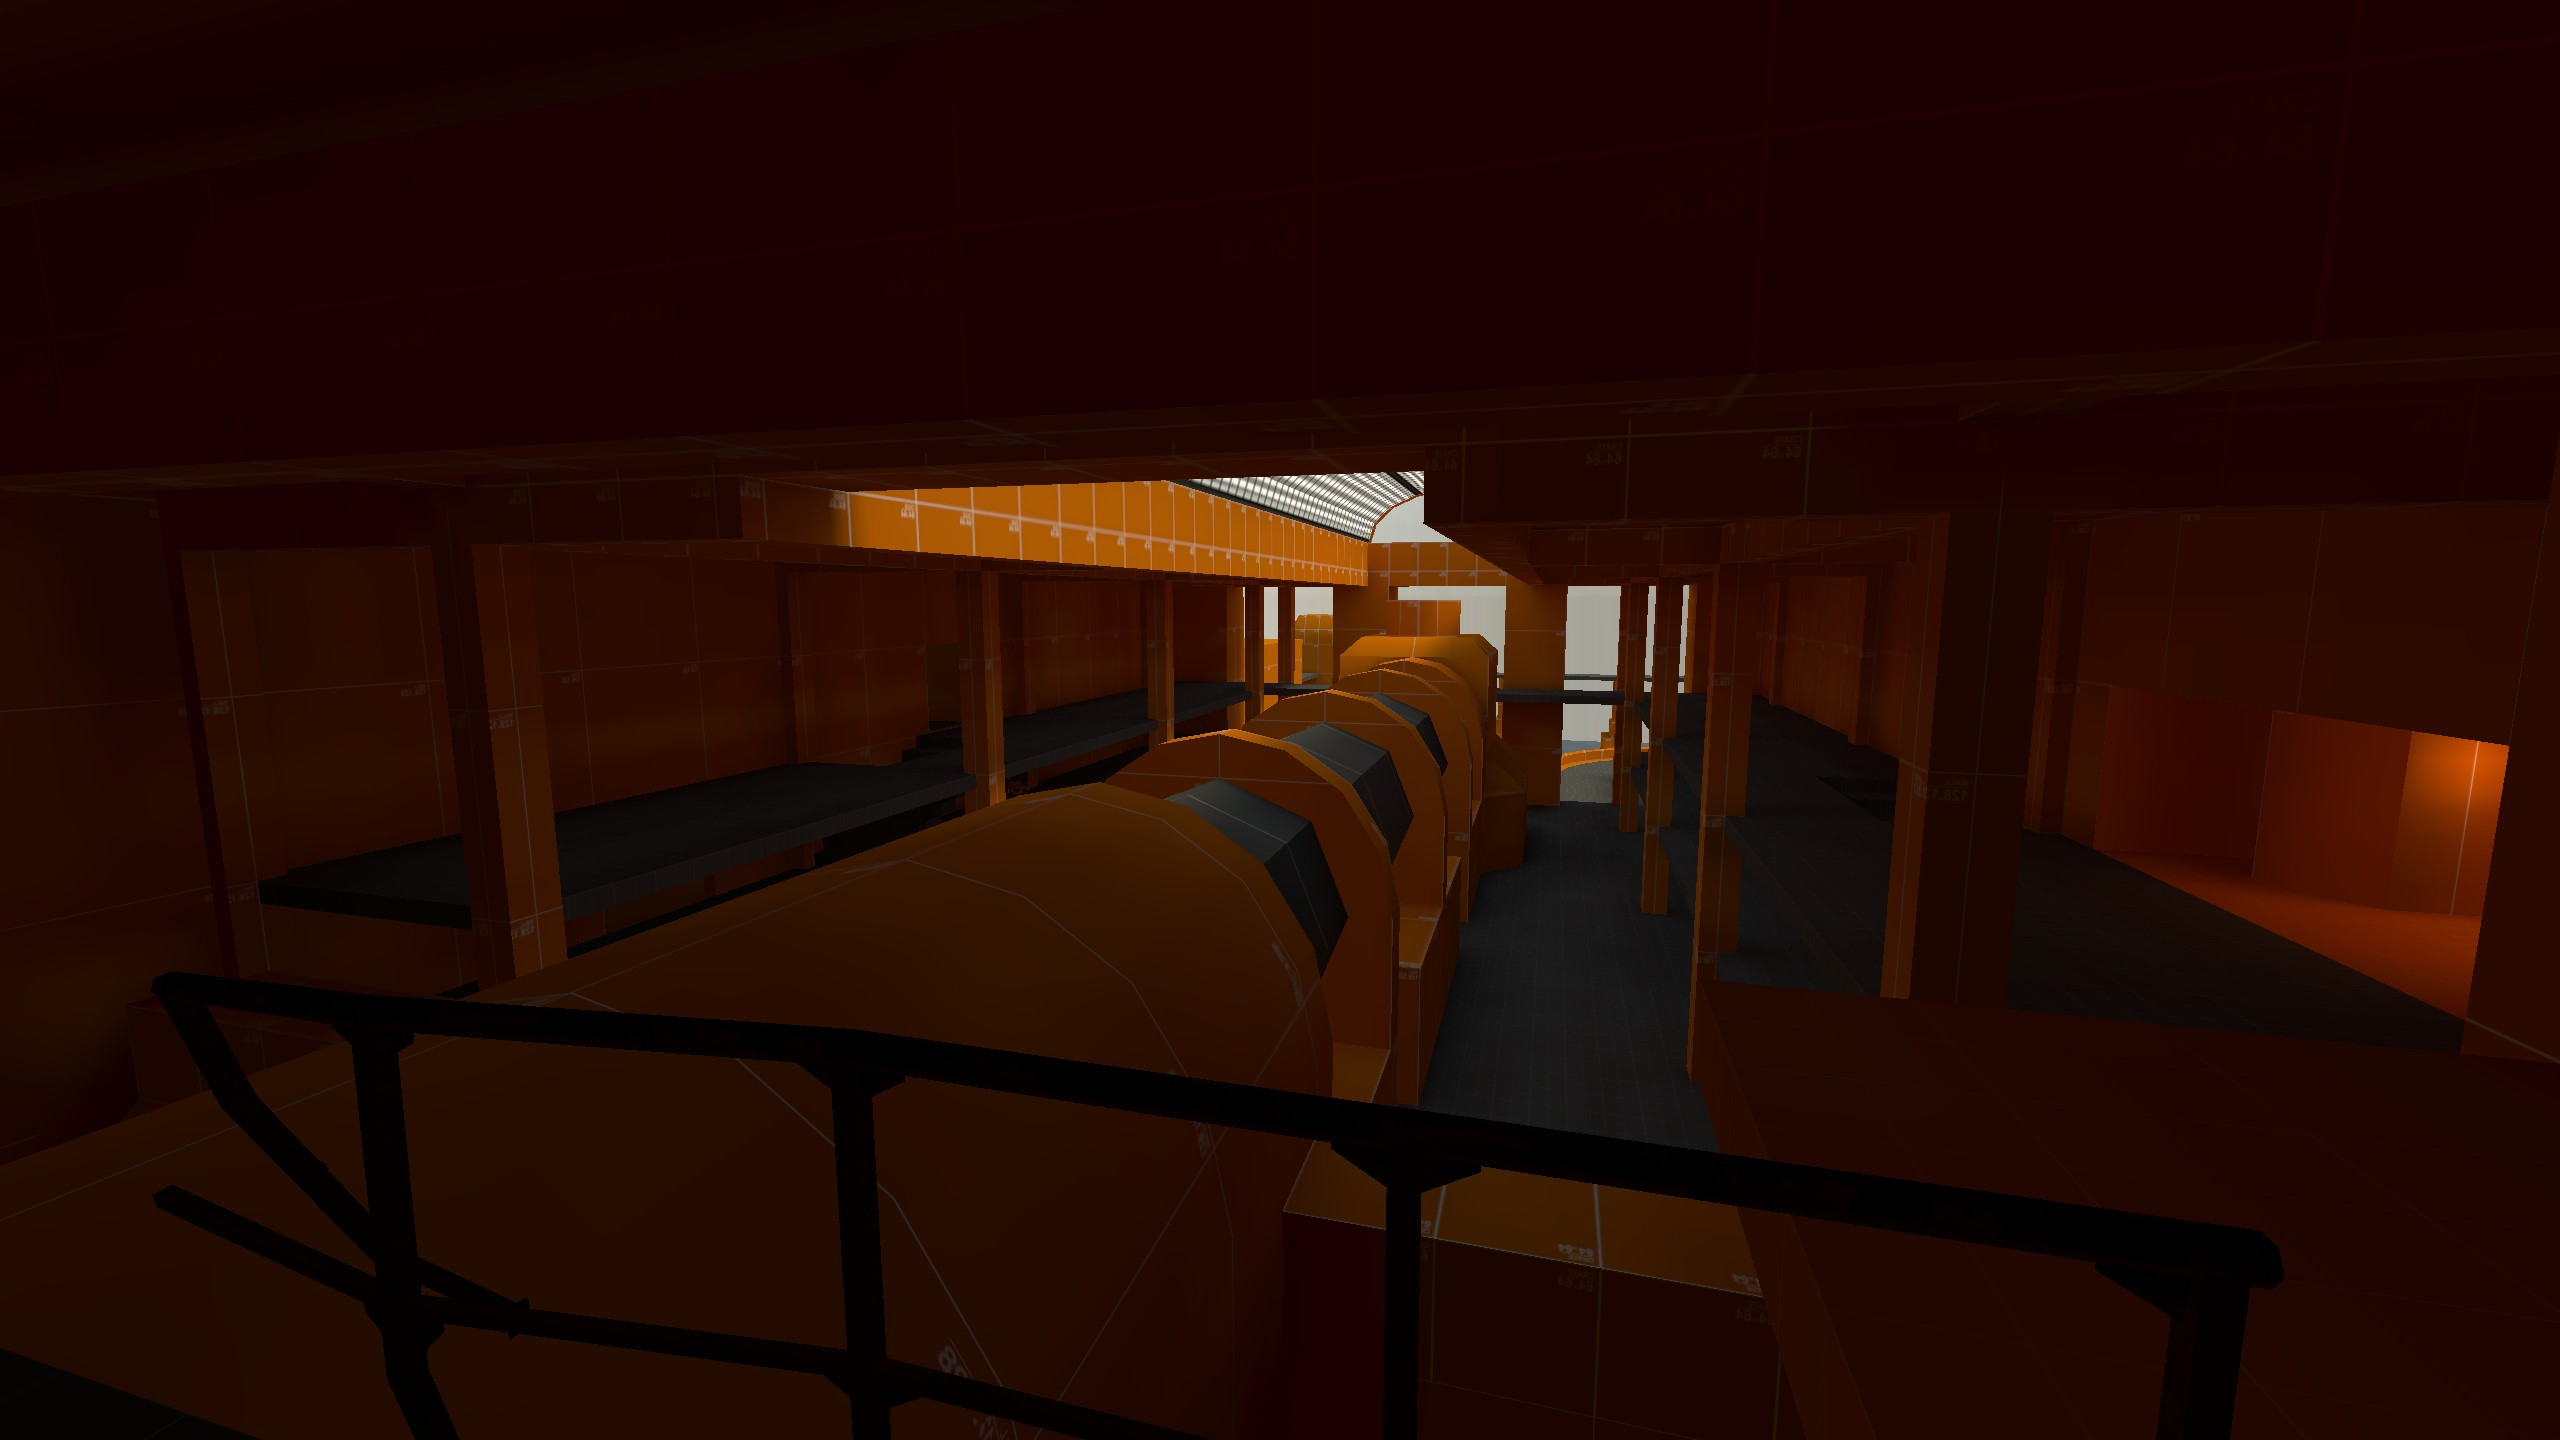 A blockout screenshot of the turbine room from the back gantry.